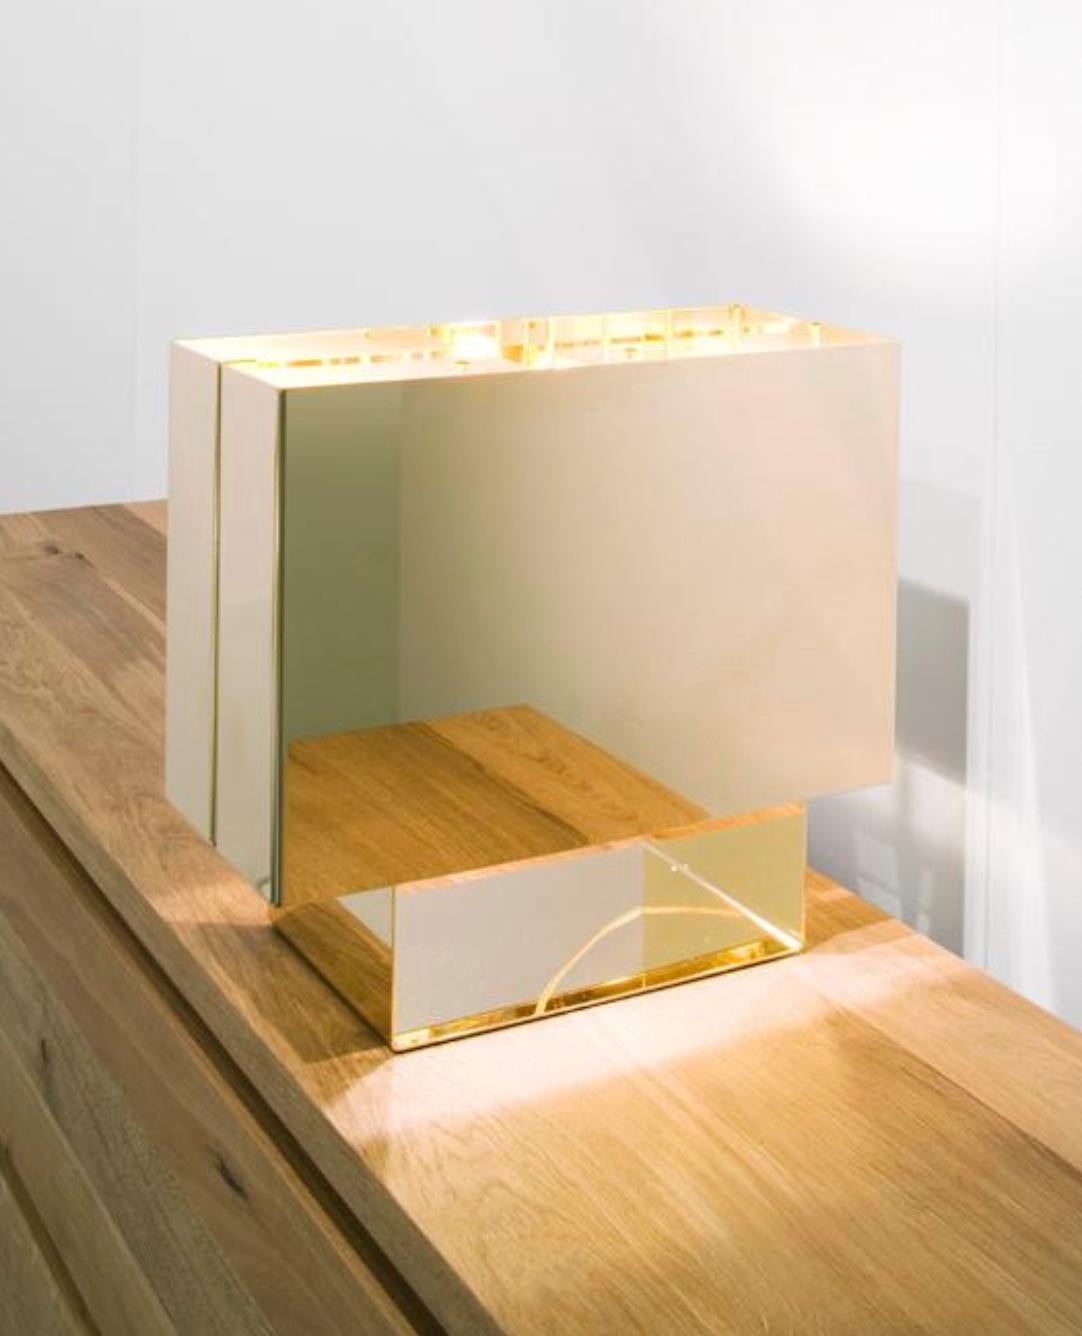 Modern Mark Holmes 'Seam One' Table Lamp in 24k Gold Finish for E15 Selected For Sale